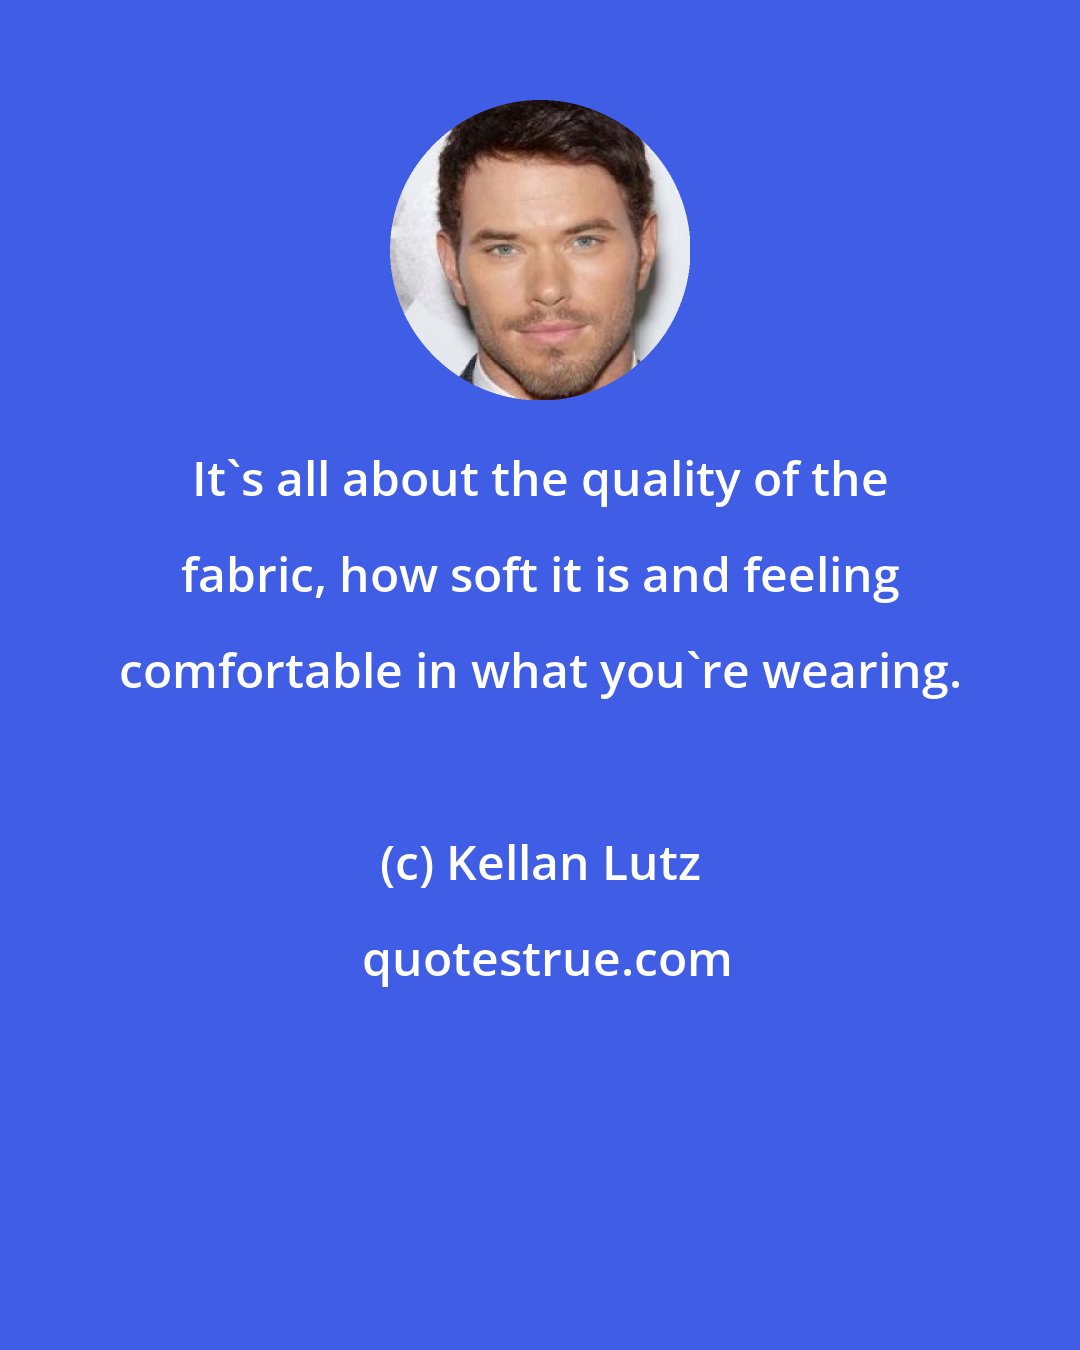 Kellan Lutz: It's all about the quality of the fabric, how soft it is and feeling comfortable in what you're wearing.